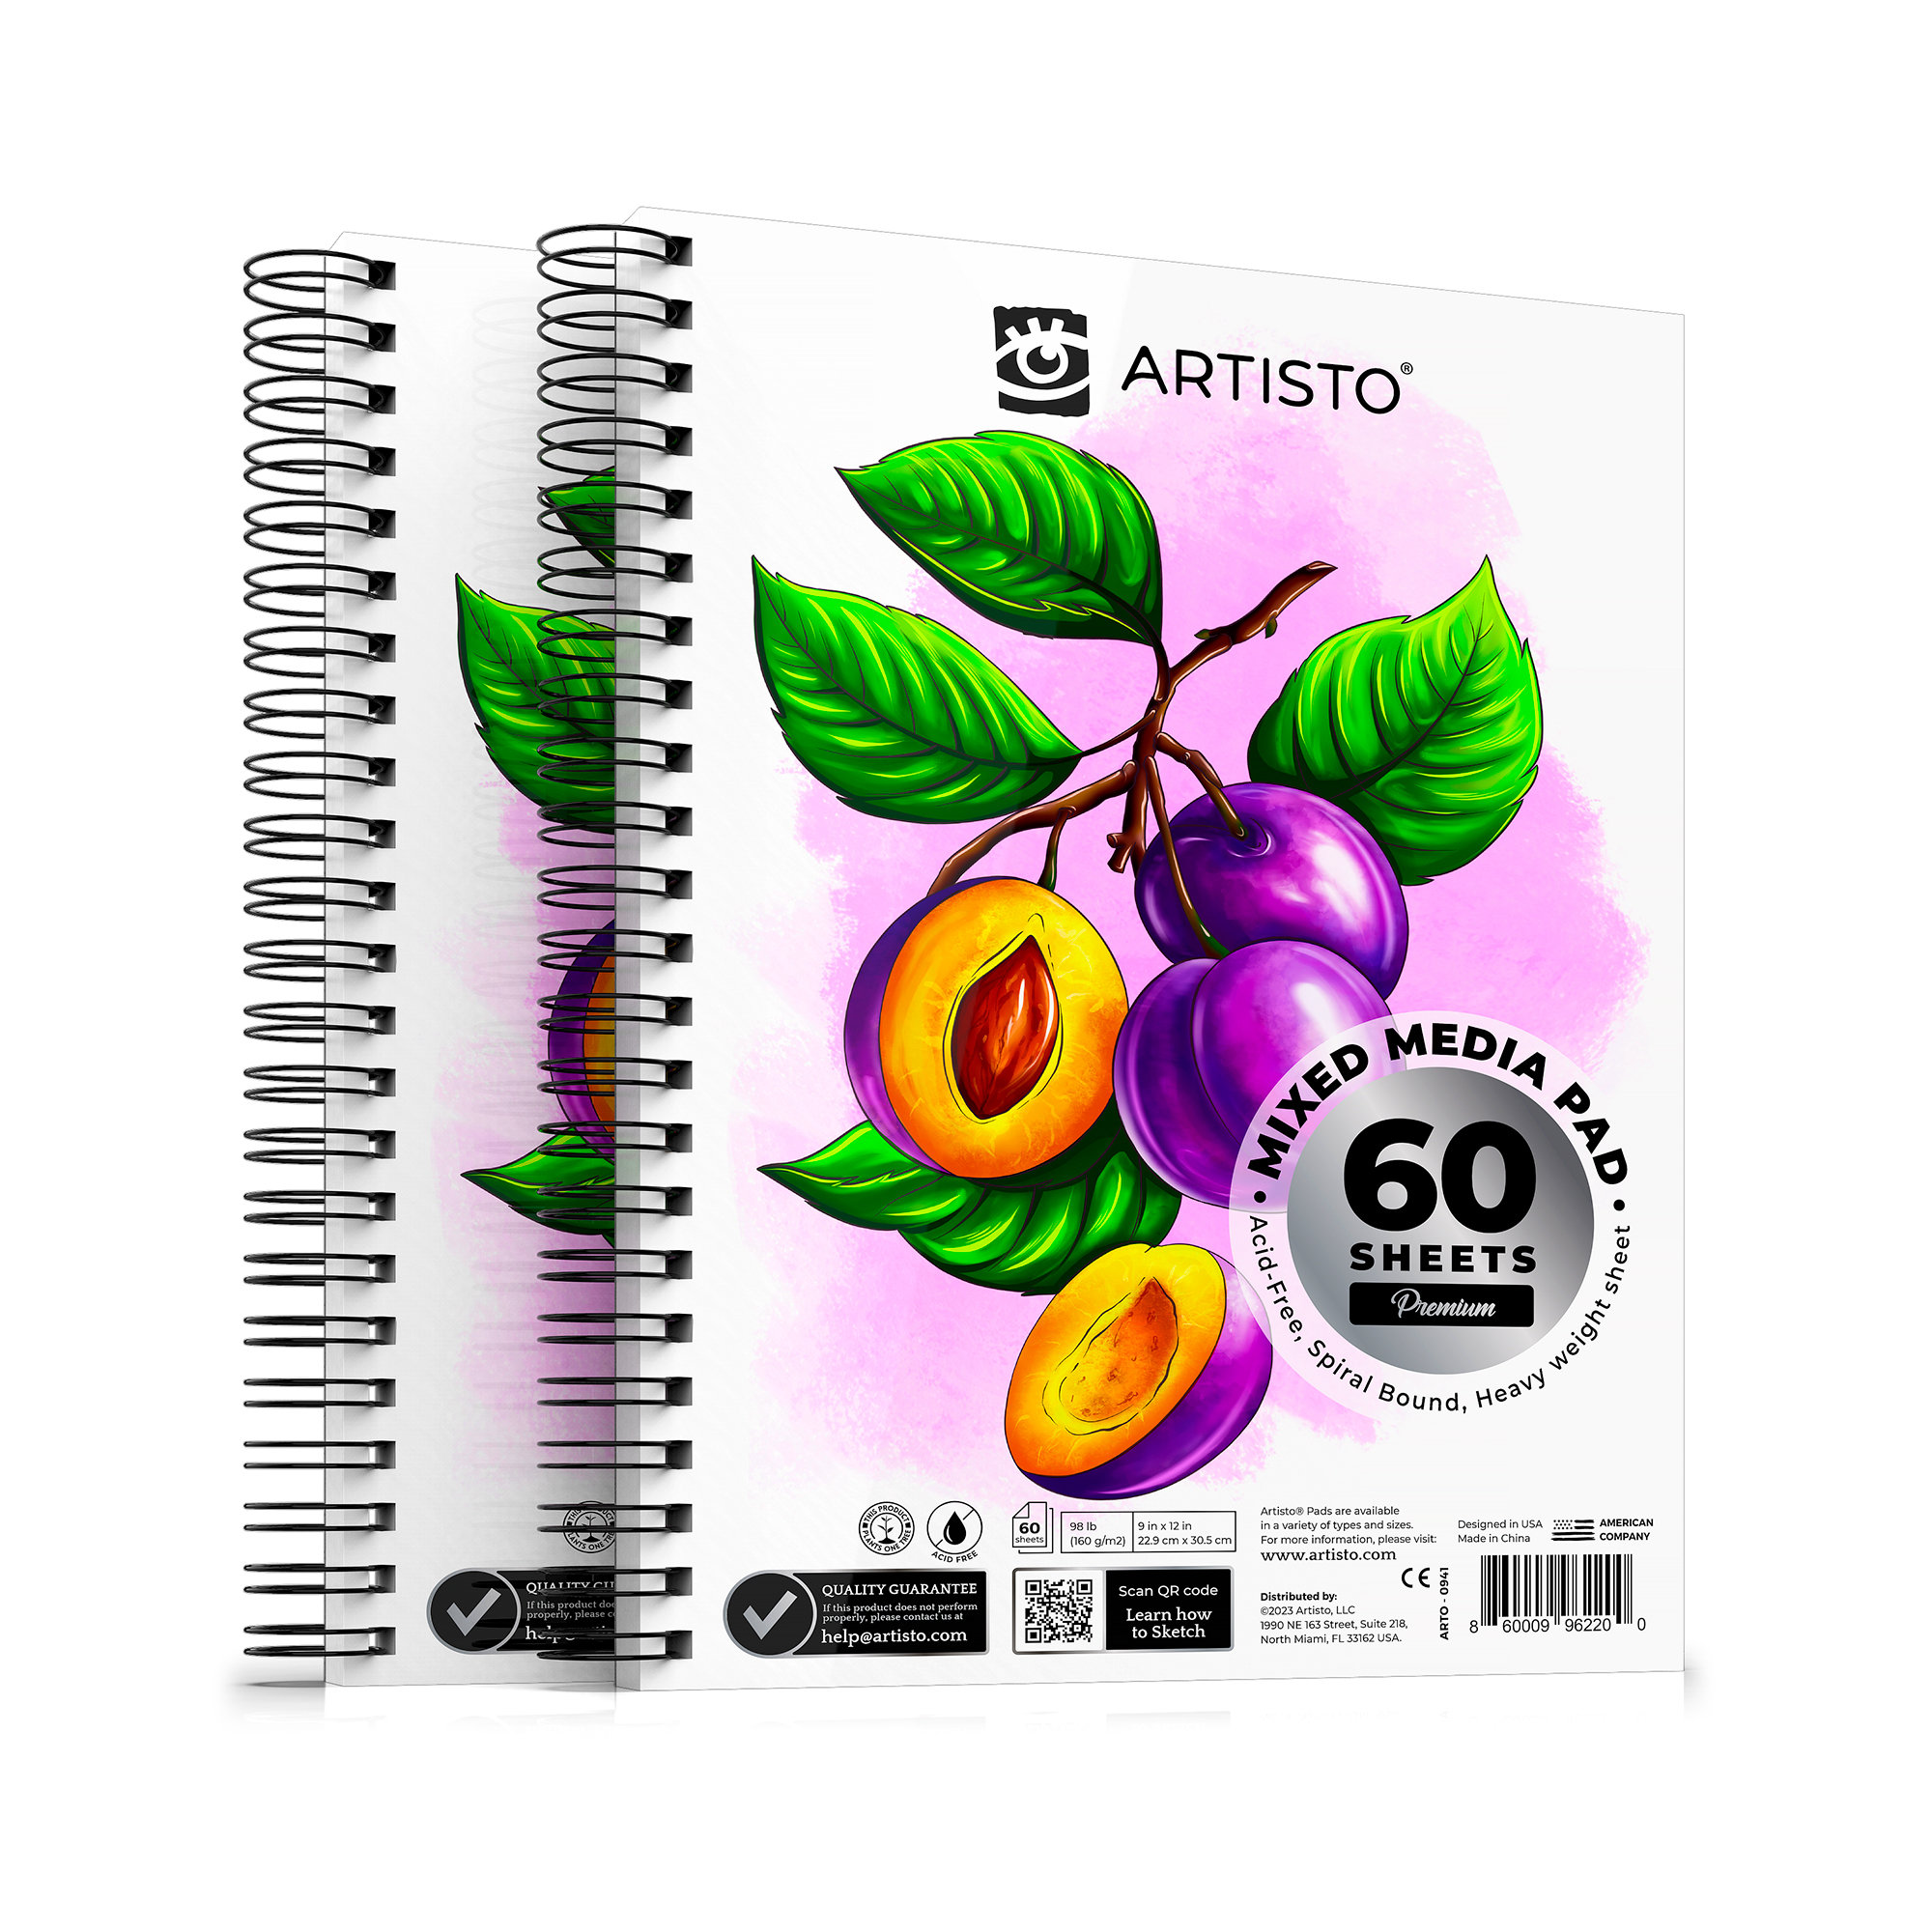 ETCHR Mixed Media Sketchbook for Drawing and Painting - A5 5.8x8.3 Inch  Cold Press 100% Cotton Vegan-Friendly Sketch Watercolor Paper - 52 Page